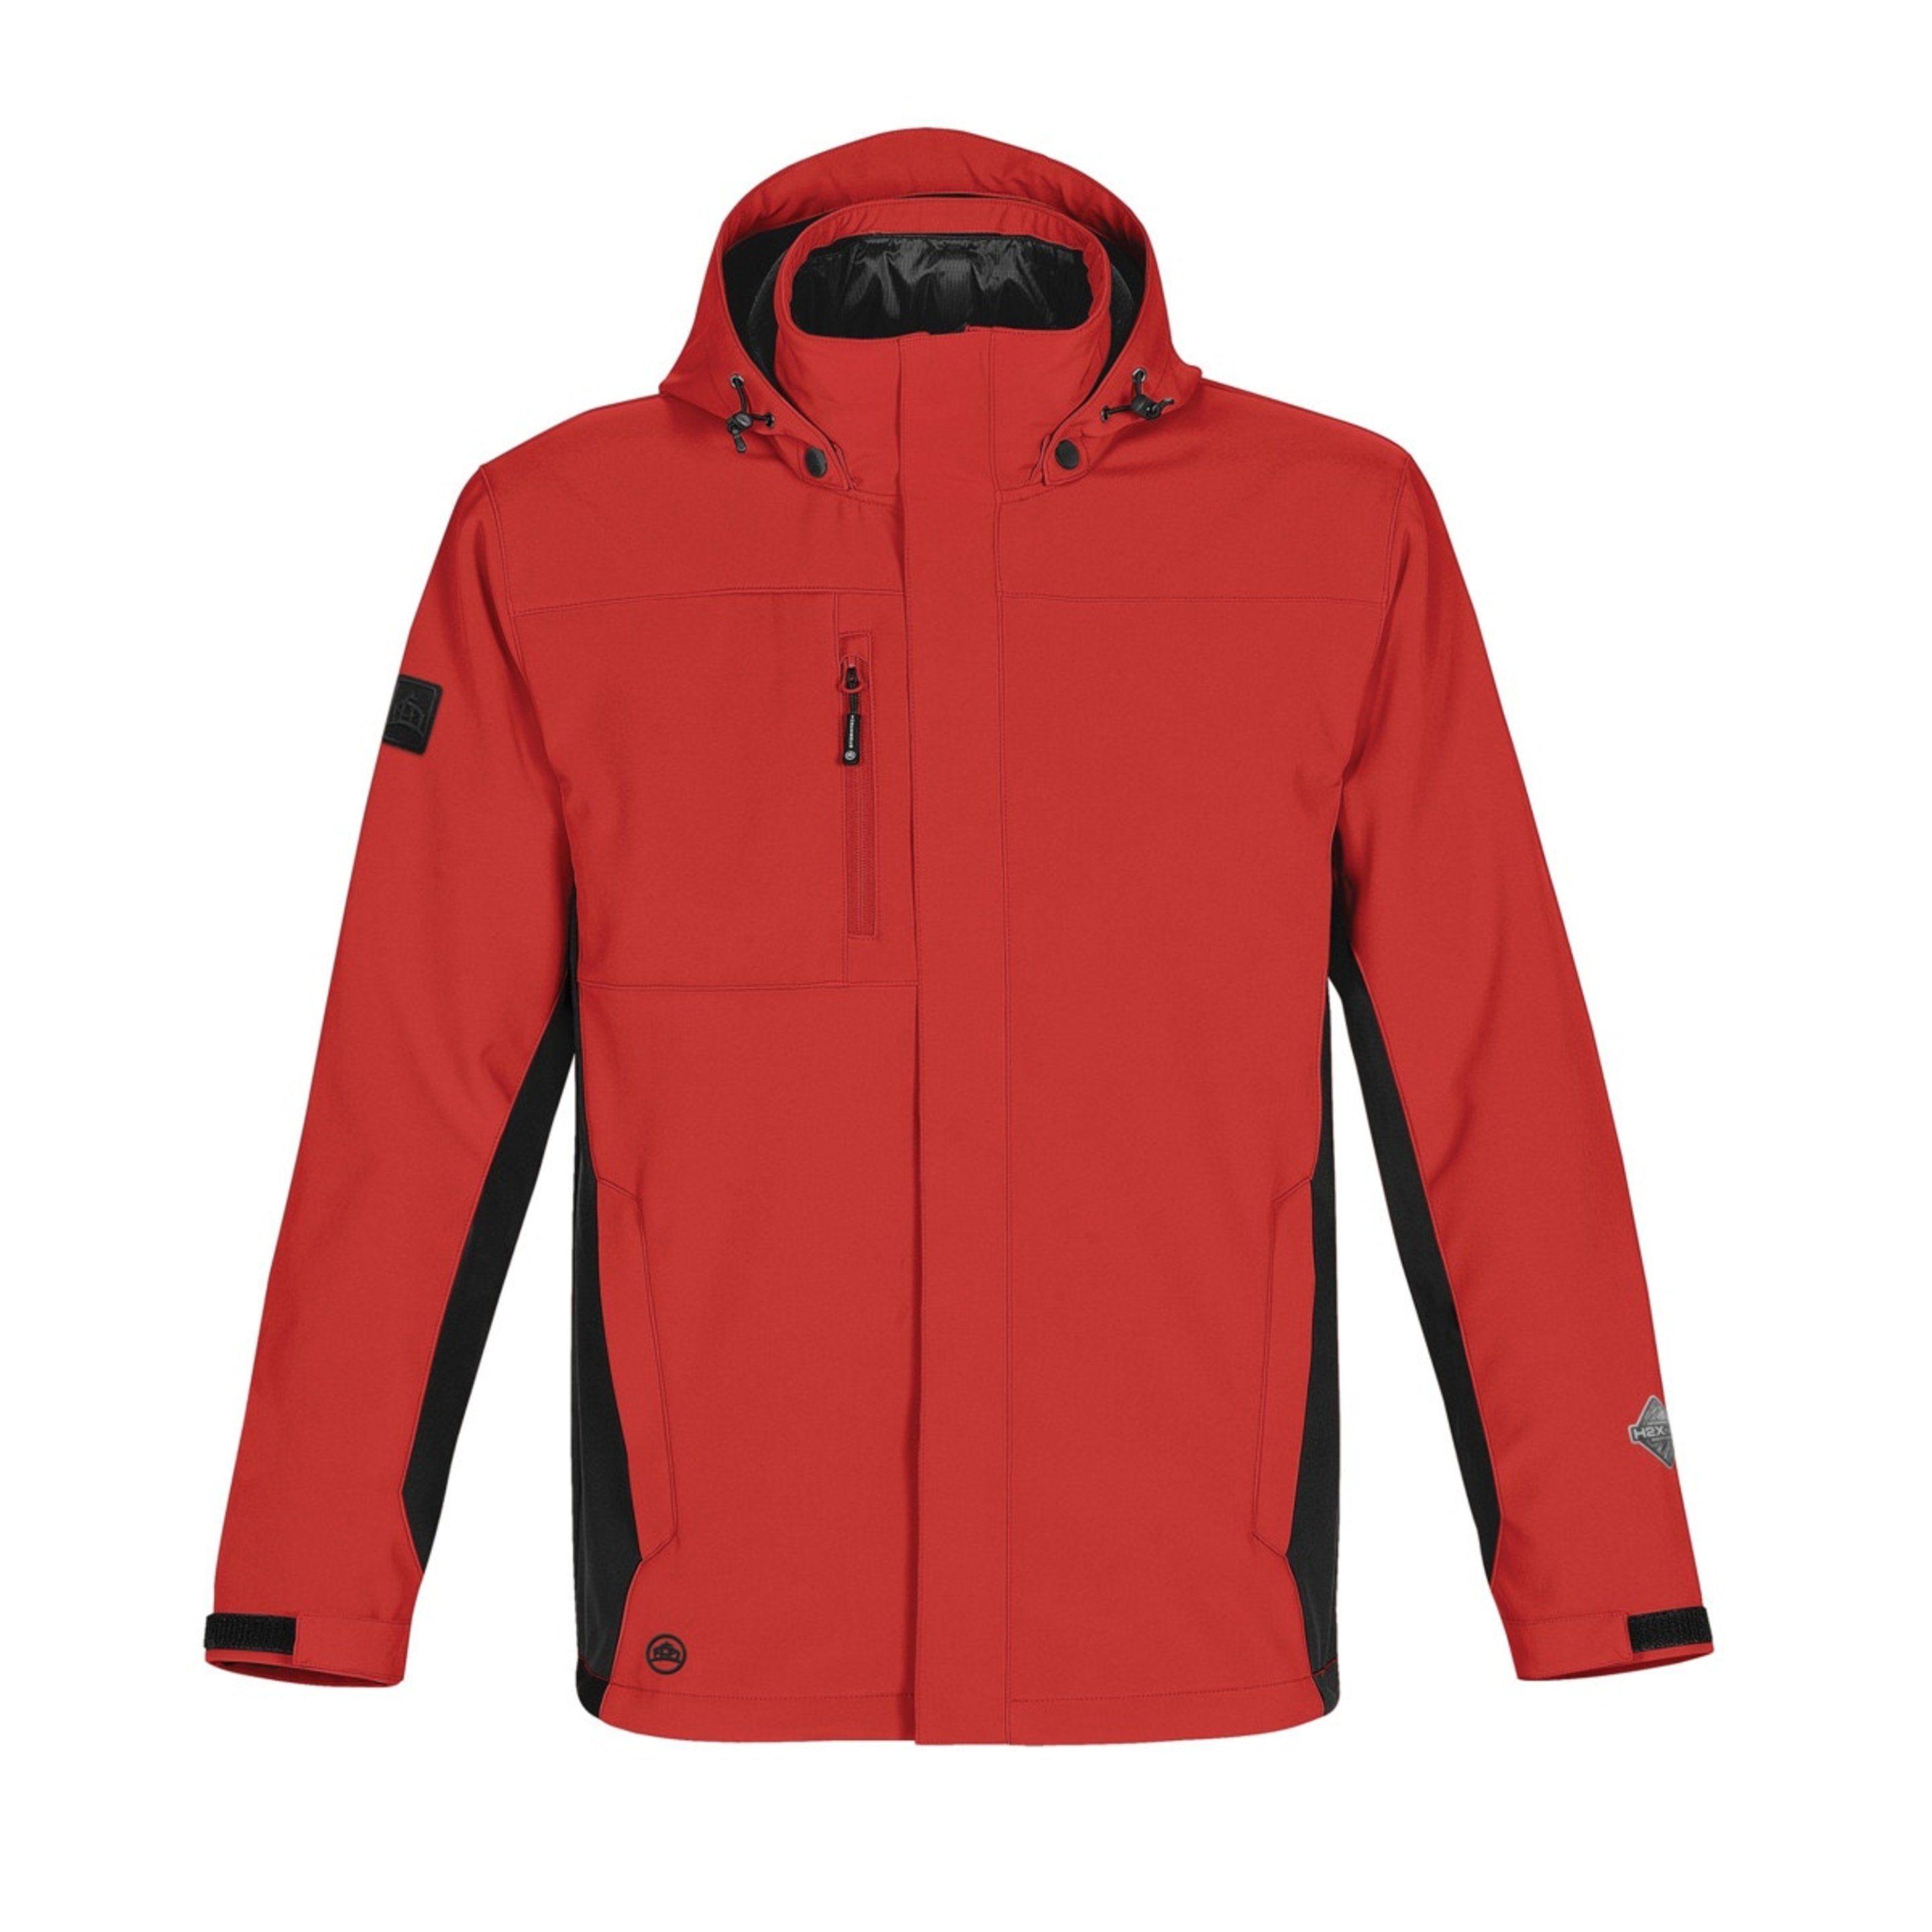 Chaqueta Impermeable Y Transpirable Modelo Atmosphere Stormtech